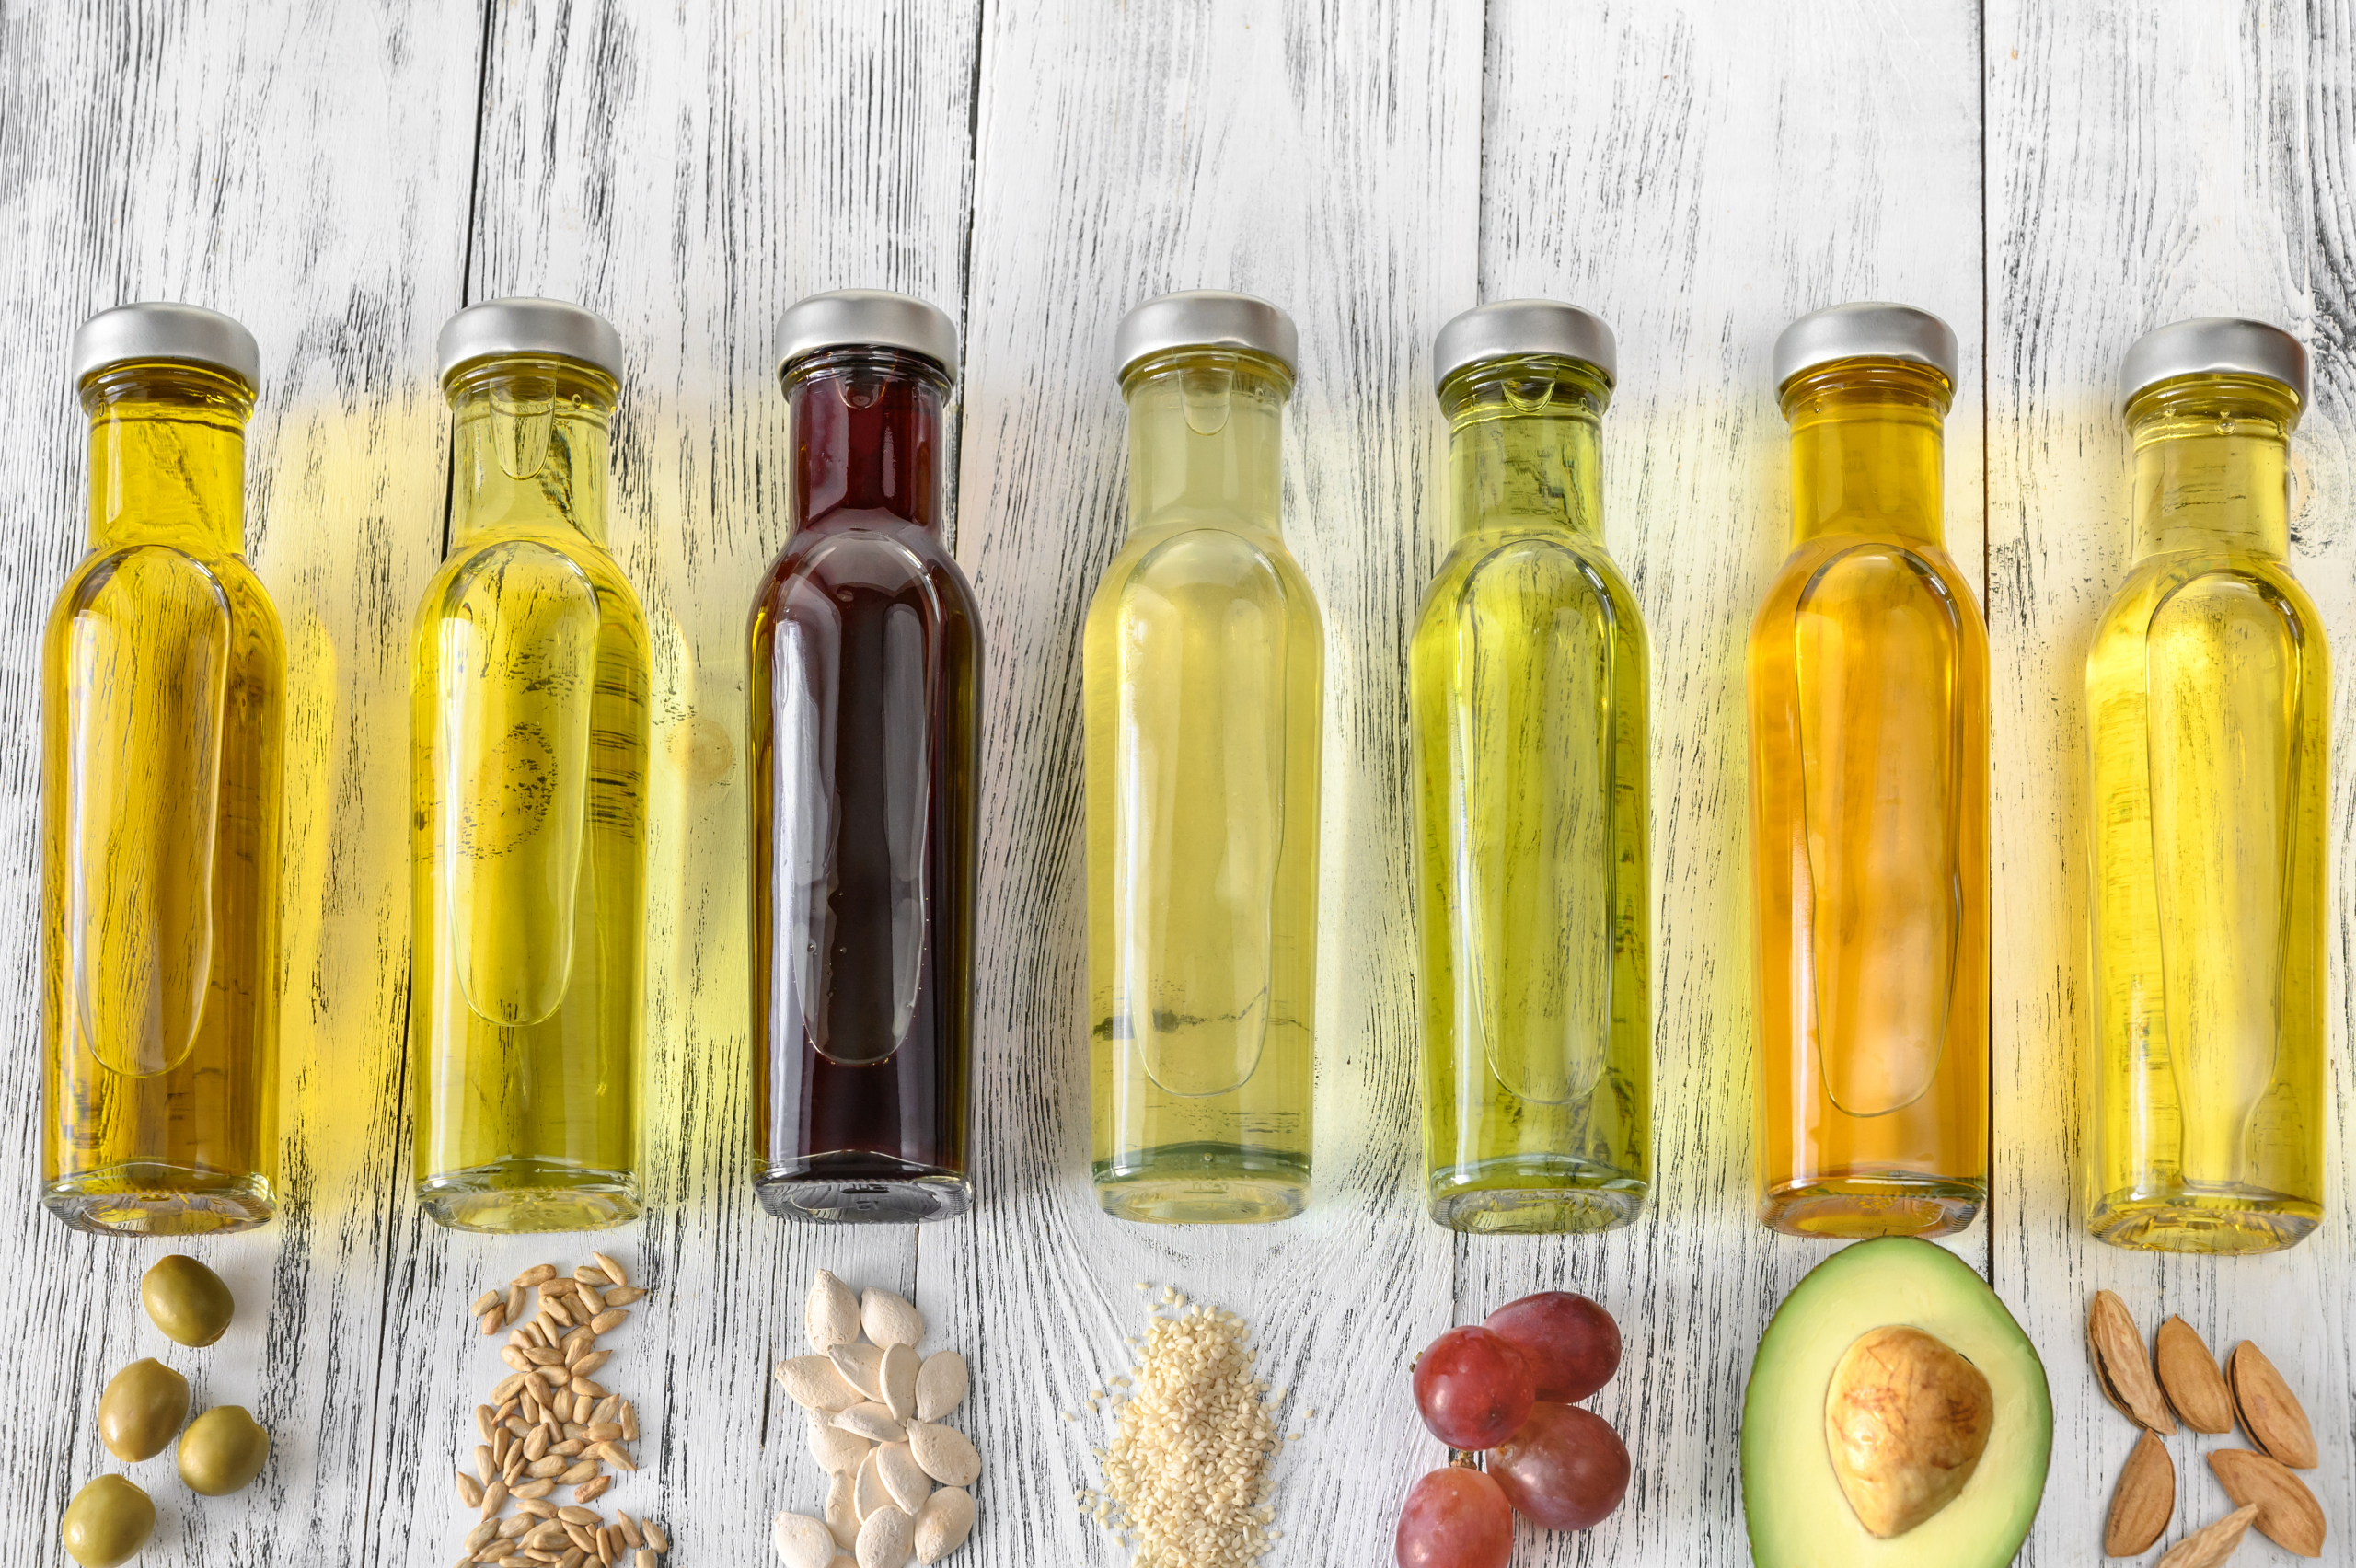 The 10 Healthiest Cooking Oils, According To Food Experts